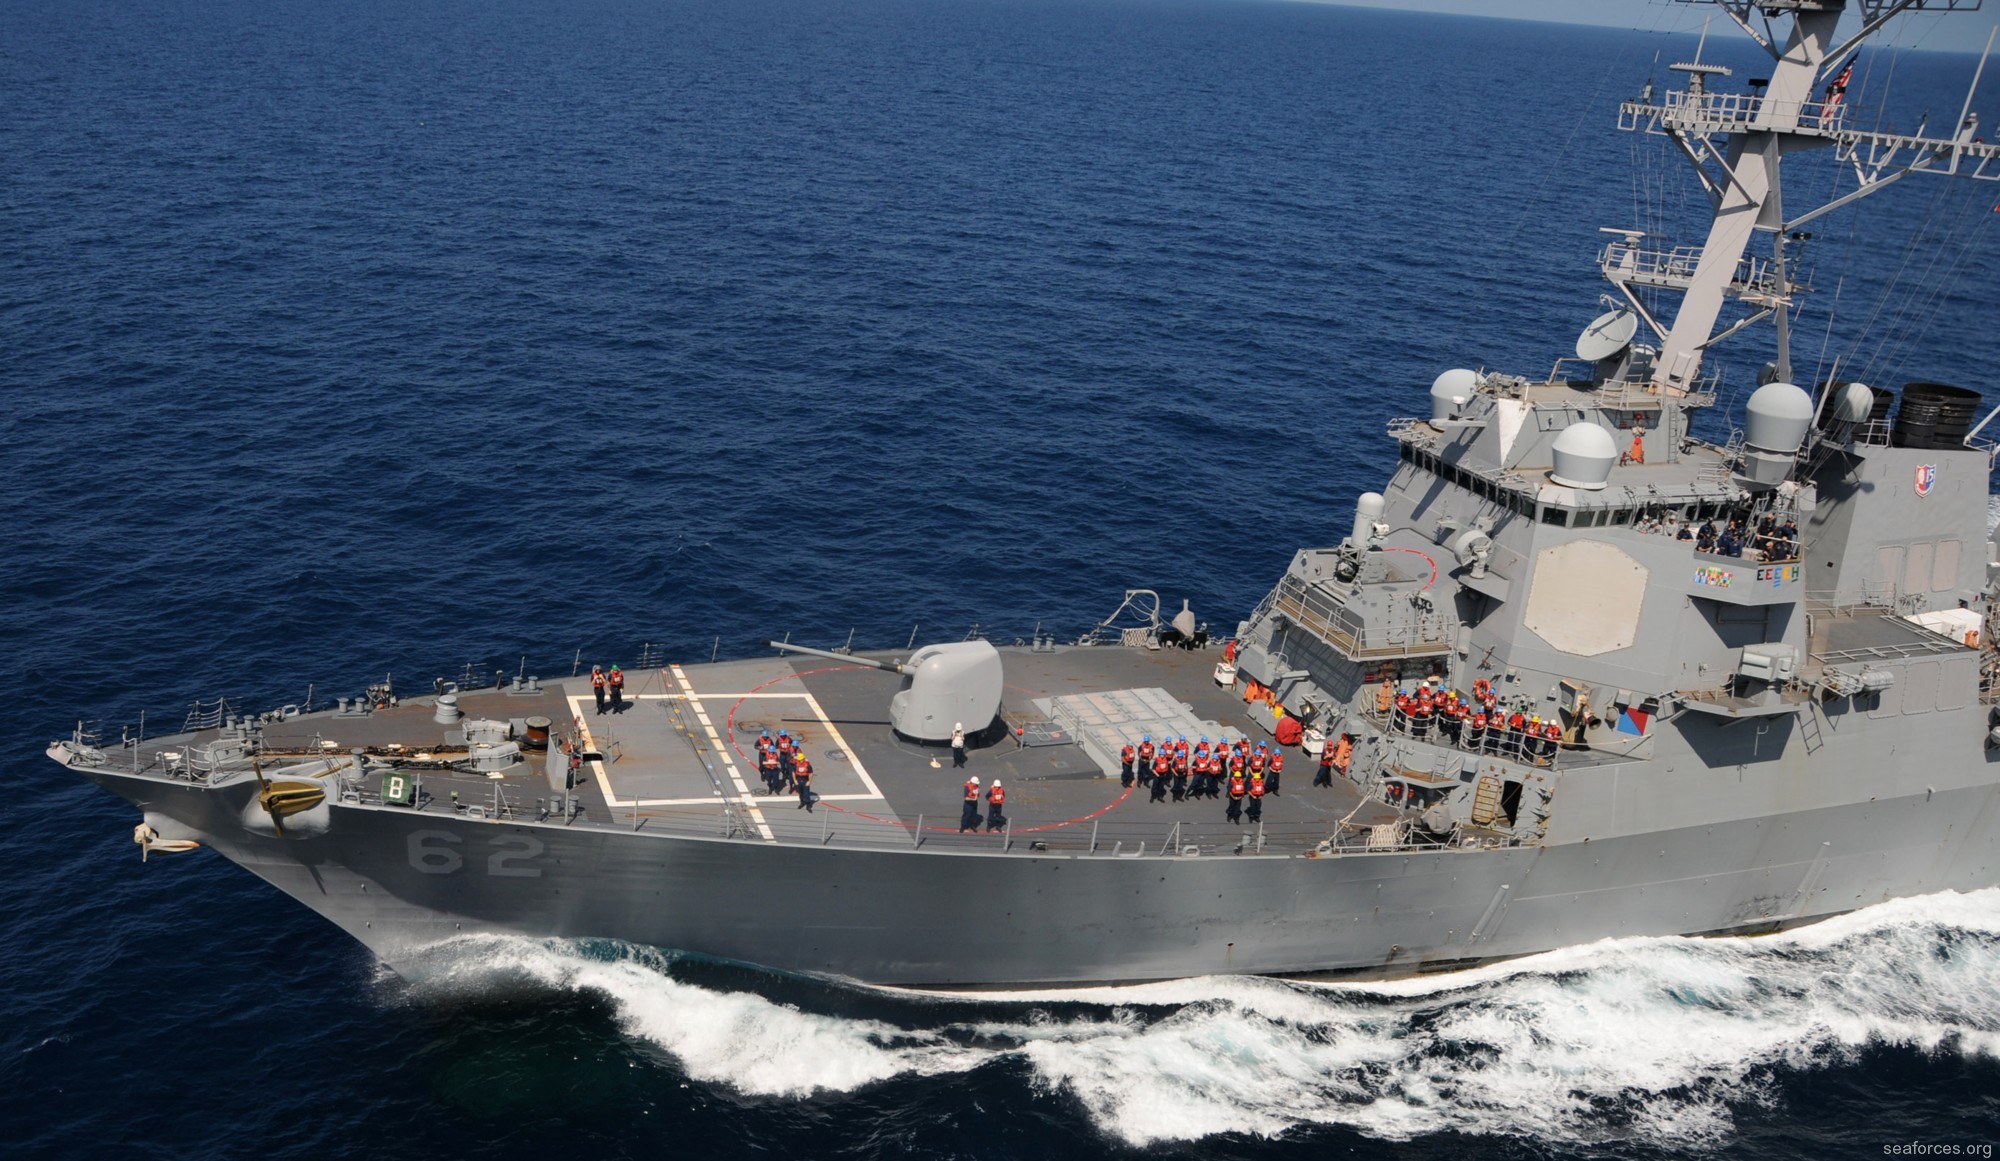 ddg-62 uss fitzgerald guided missile destroyer 2013 42 replenishment at sea ras